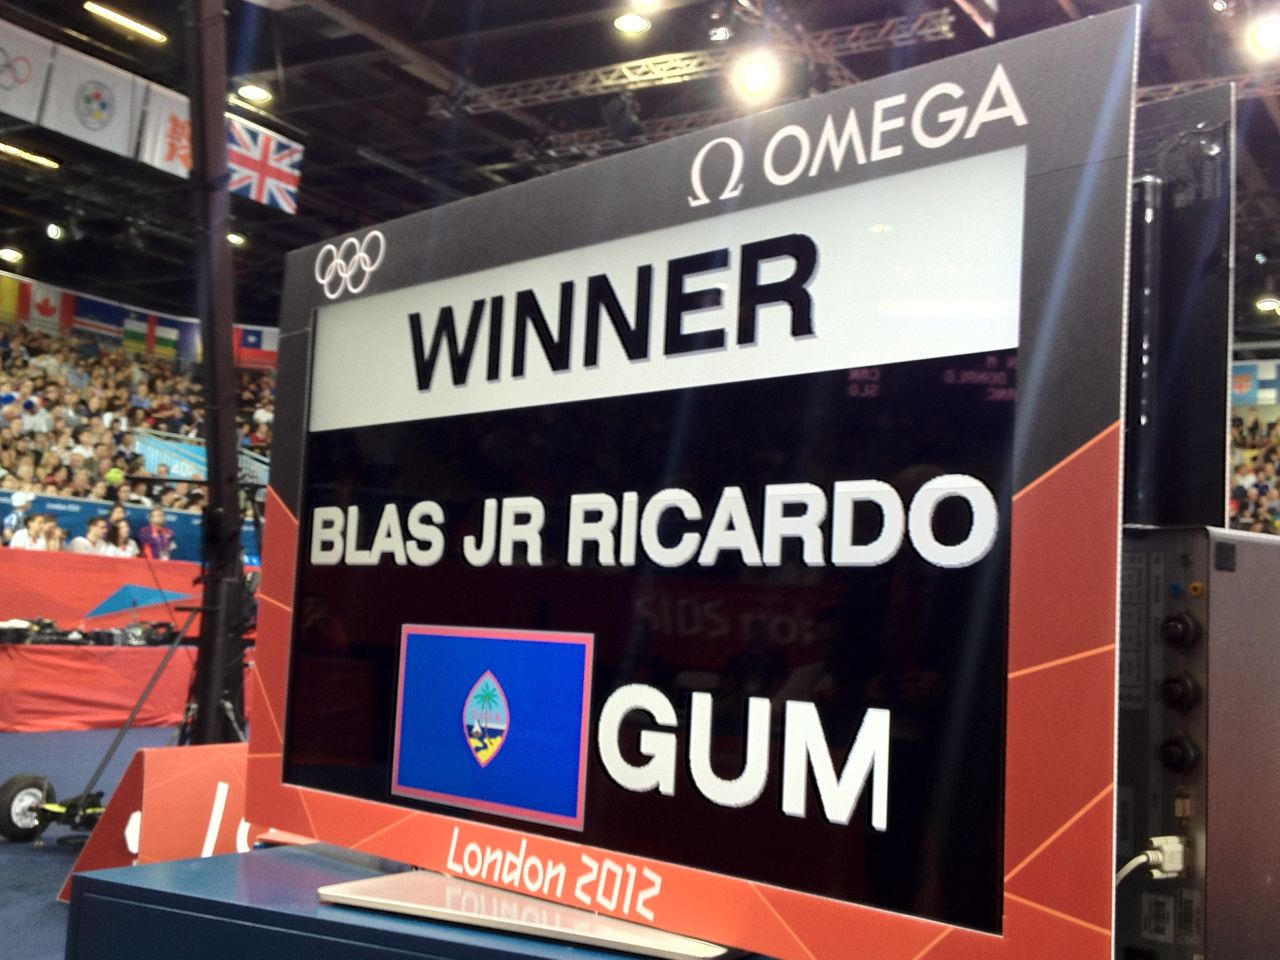 And Blas Jr., who trains for four to six hours everyday, doesn't fail to deliver. The first-round win over Facinet Keita of Guinea was Guam's first such win in its history, a major achievement for the judokan player.